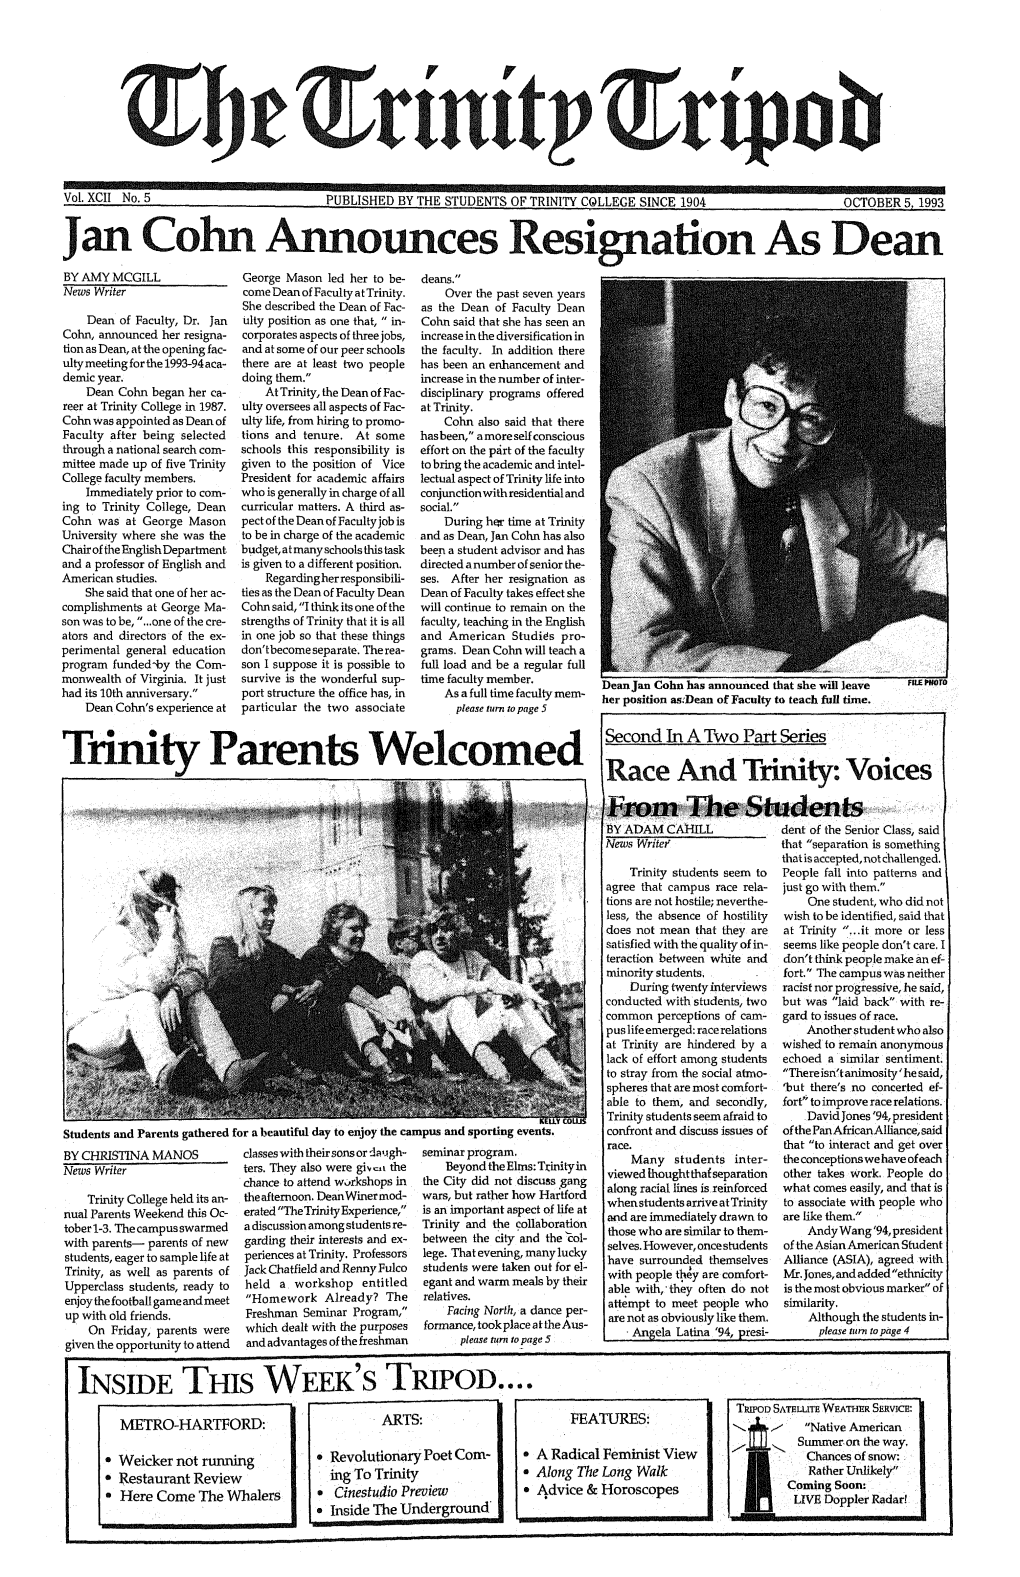 Jan Cohn Announces Resignation As Dean BYAMYMCGILL George Mason Led Her to Be- Deans." News Writer Come Dean of Faculty at Trinity